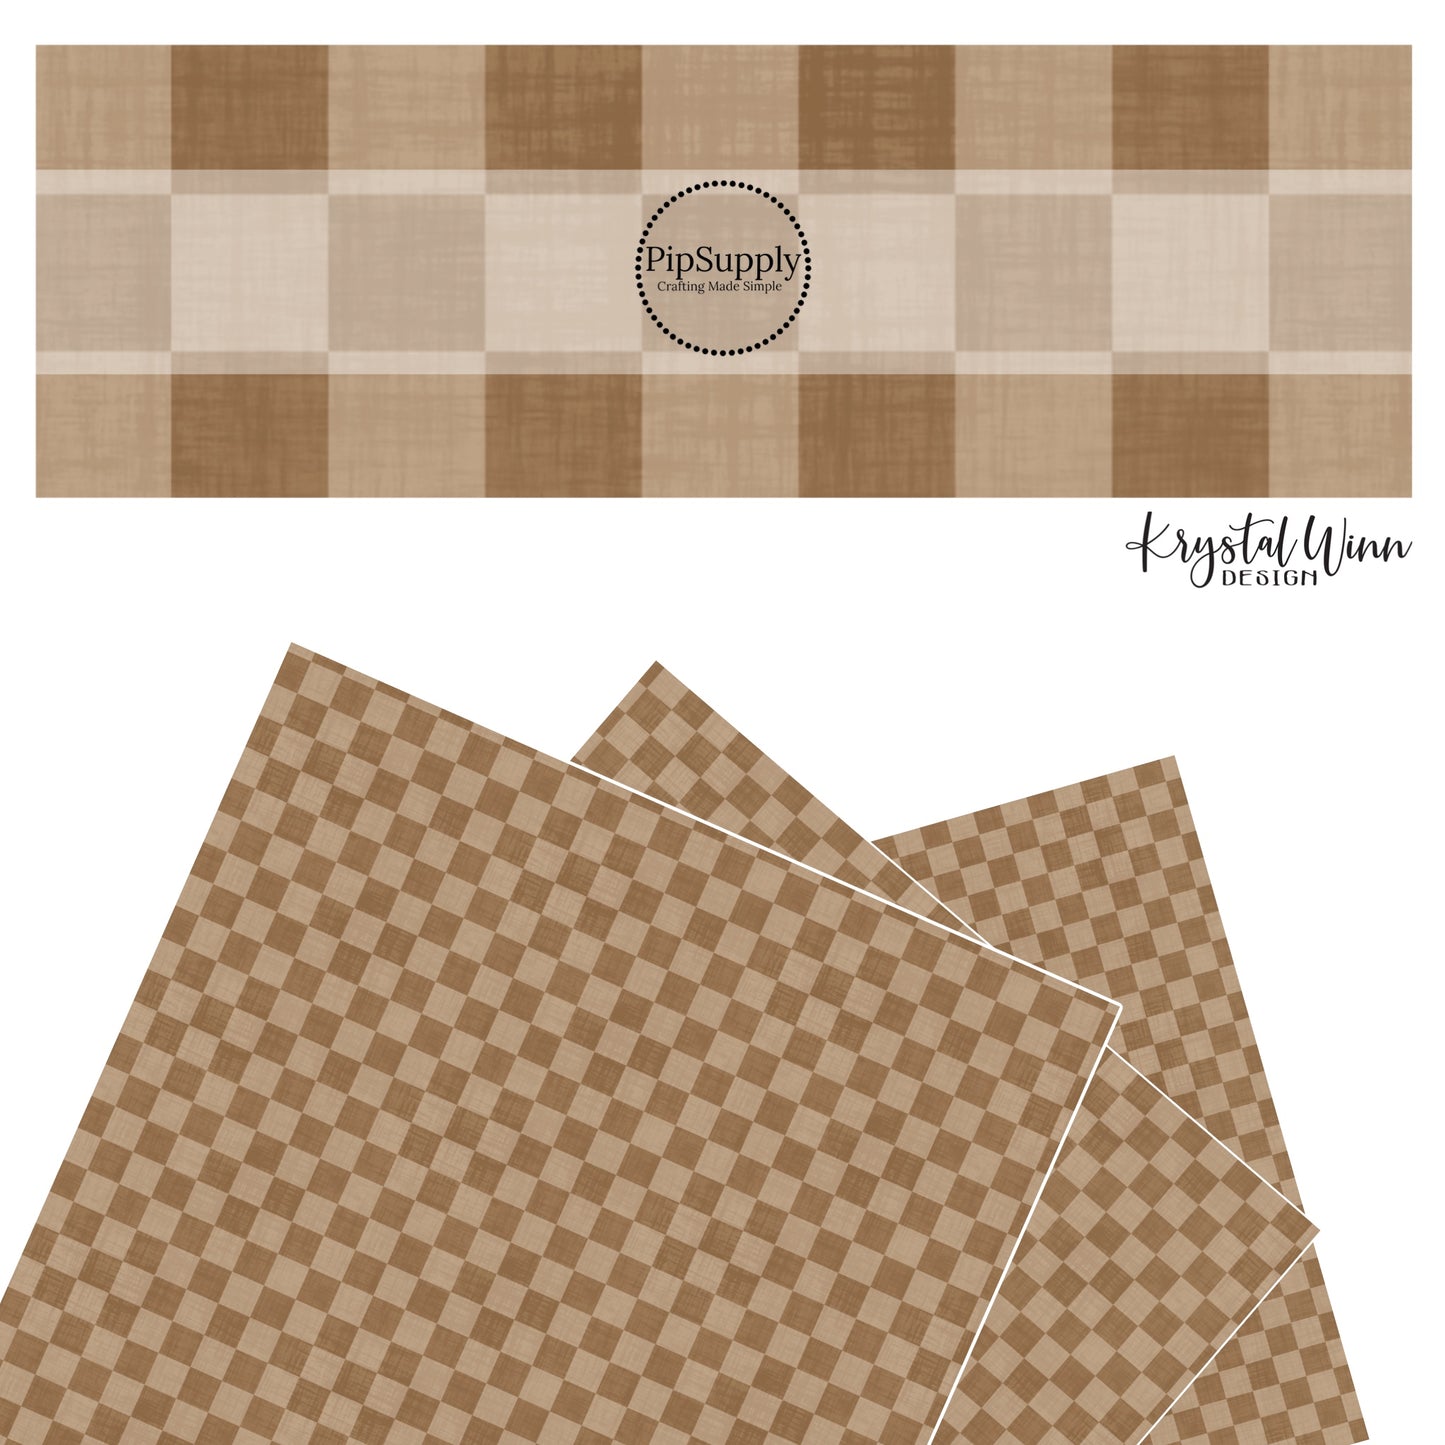 Dark brown and light brown checkered faux leather sheets